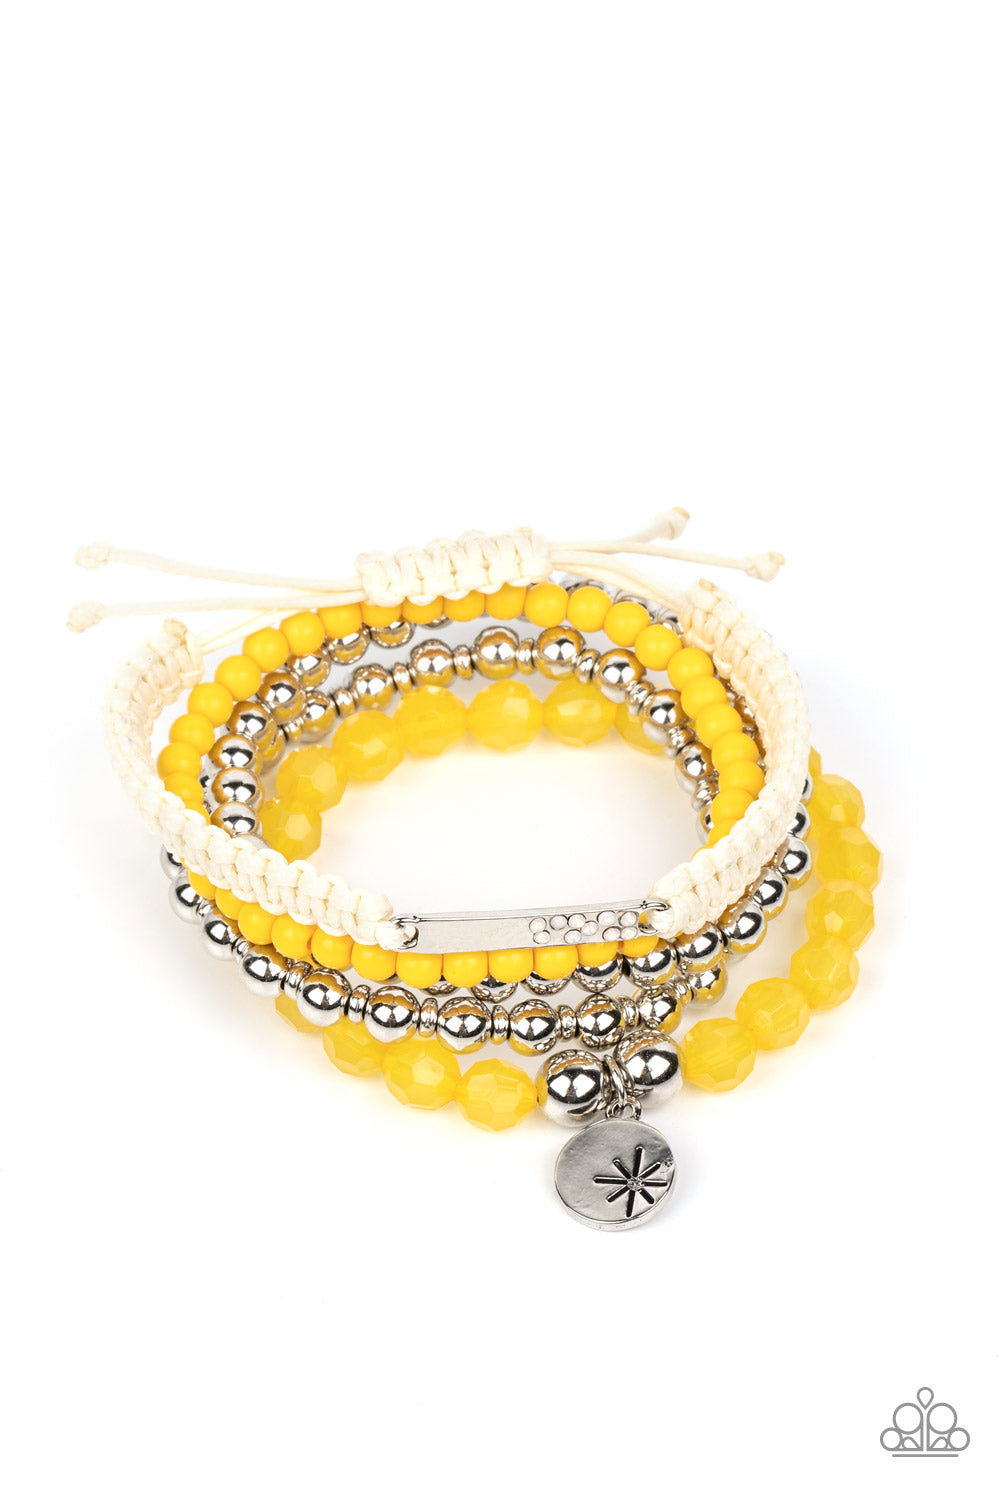 oak-sisters-jewelry-offshore-outing-yellow-bracelet-paparazzi-accessories-by-lisa